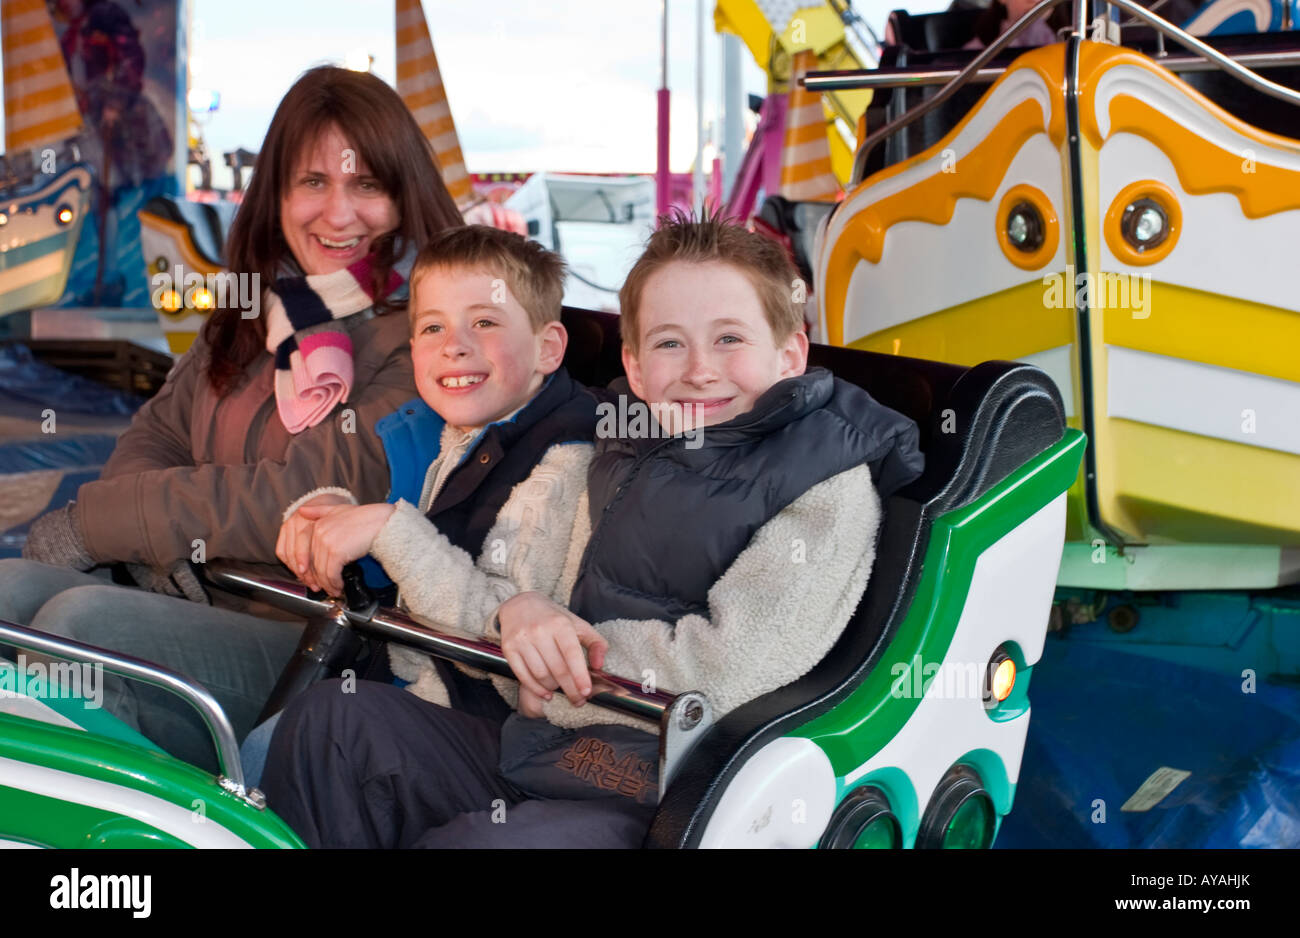 Mum and two young children on fairground ride Stock Photo